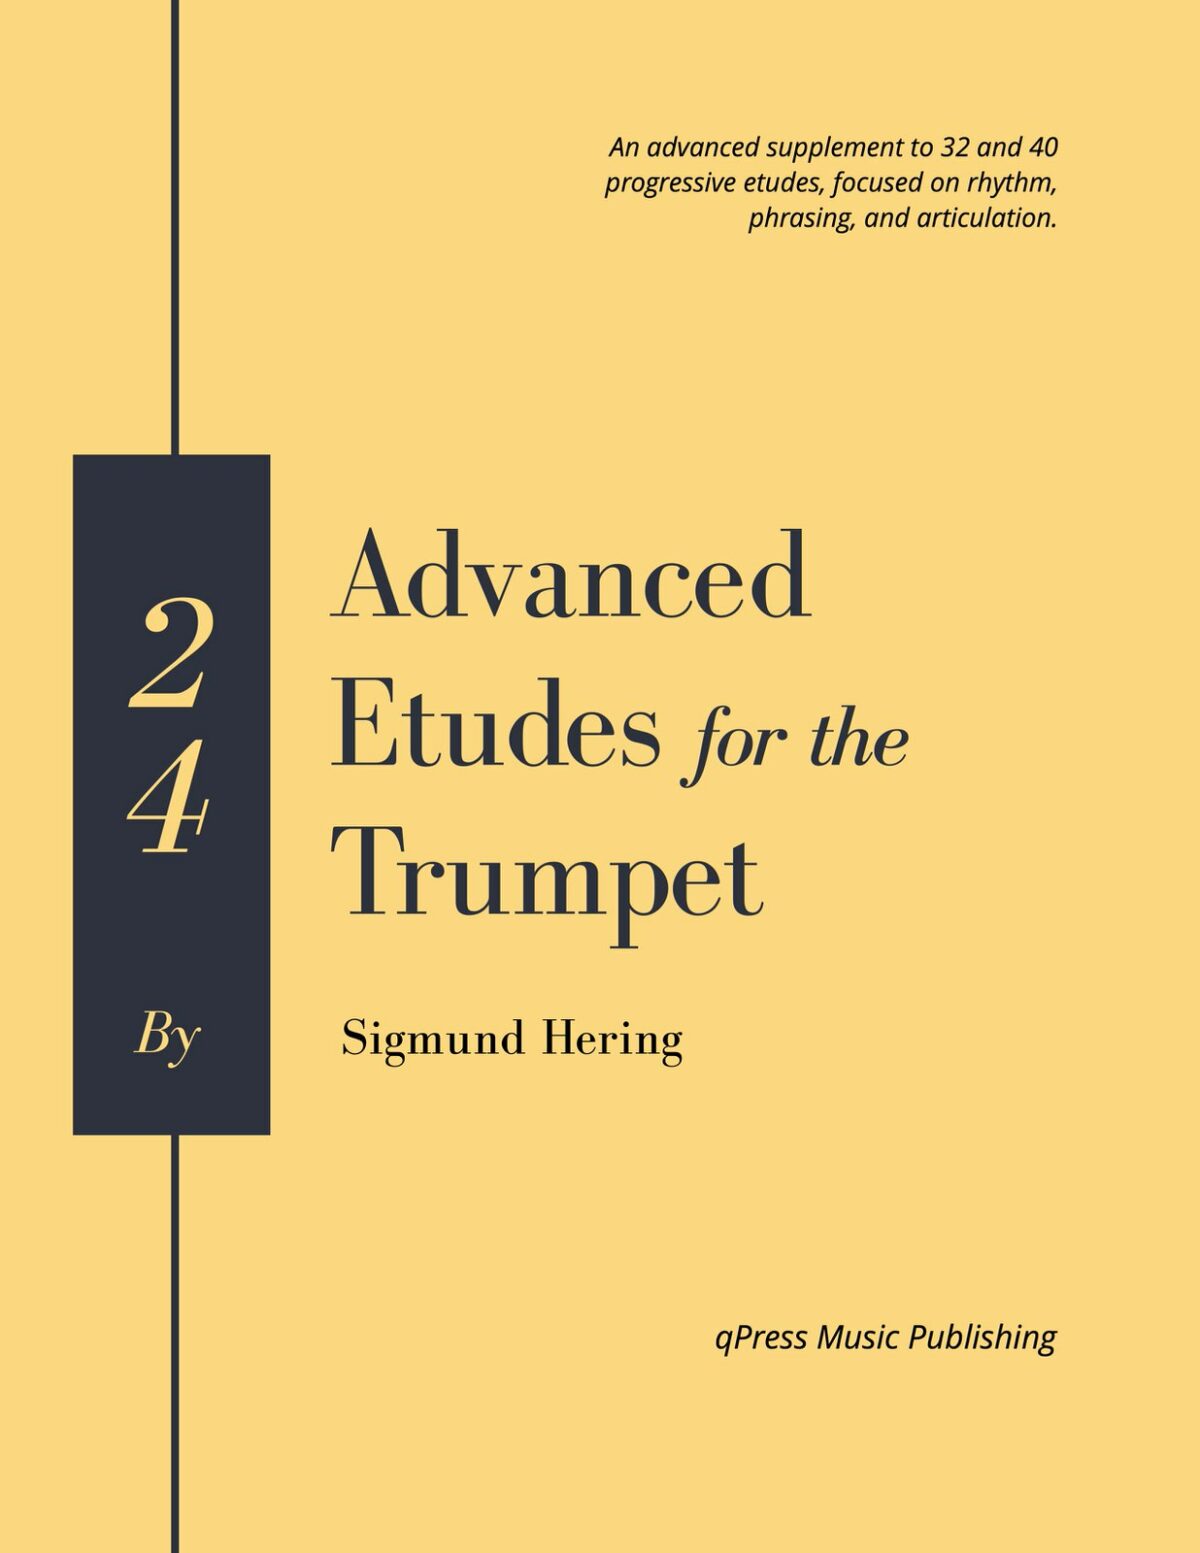 Hering, 24 Advanced Etudes for the Trumpet-p01